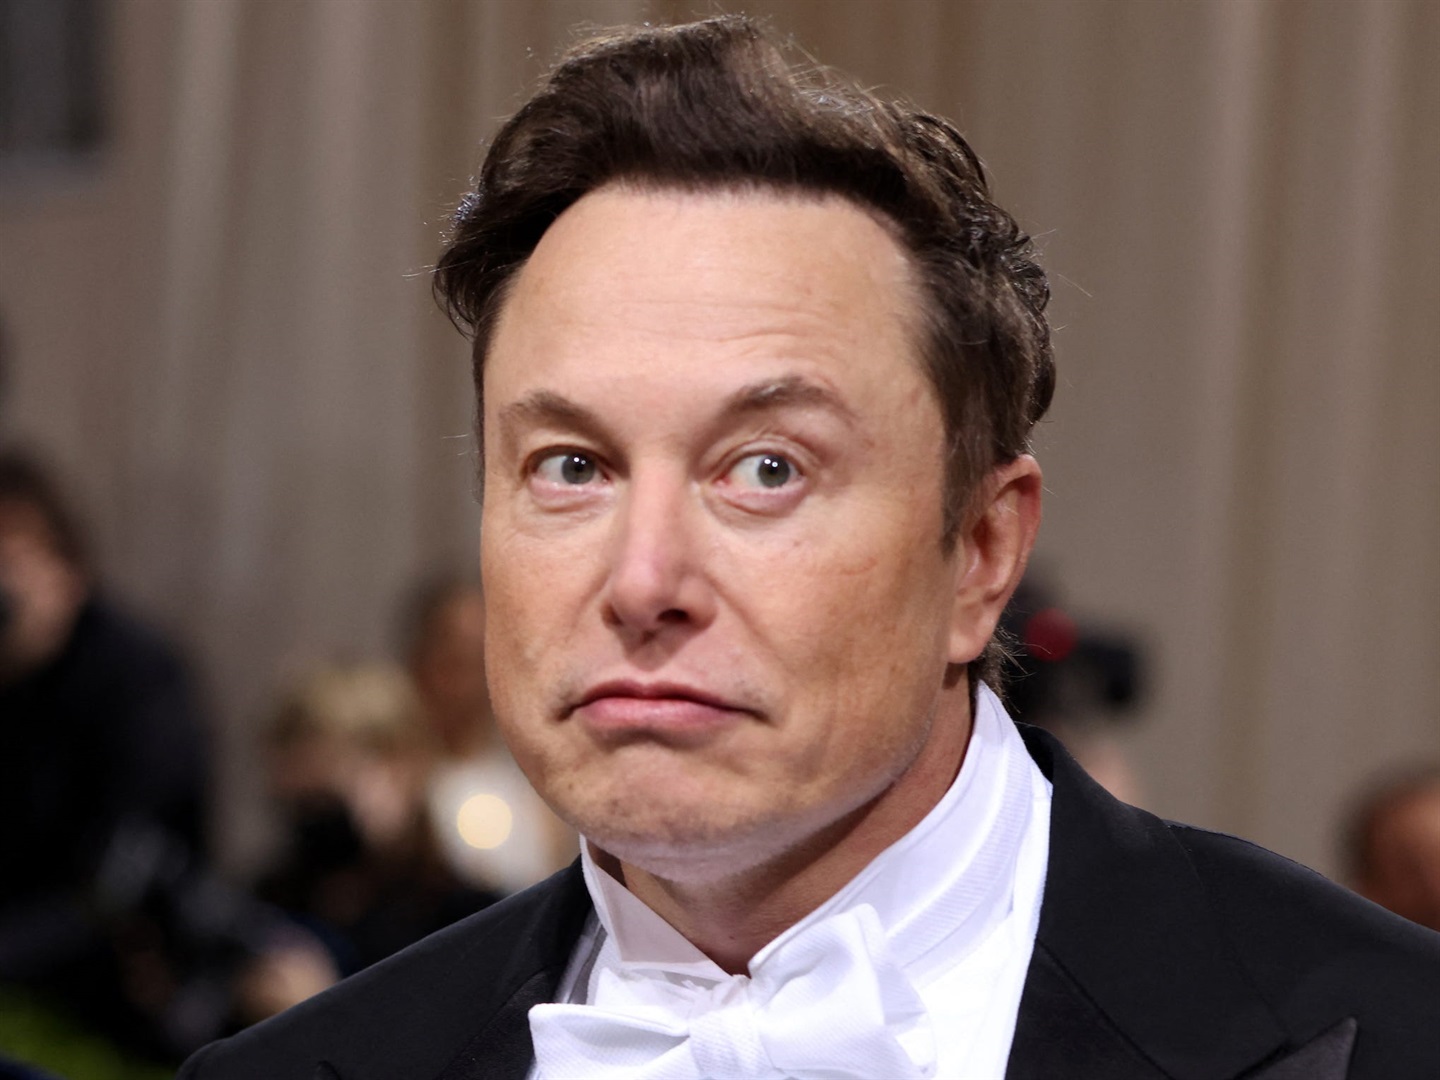 Elon Musk offered to buy flight attendant a horse for erotic massage -  sexual misconduct claim | Businessinsider